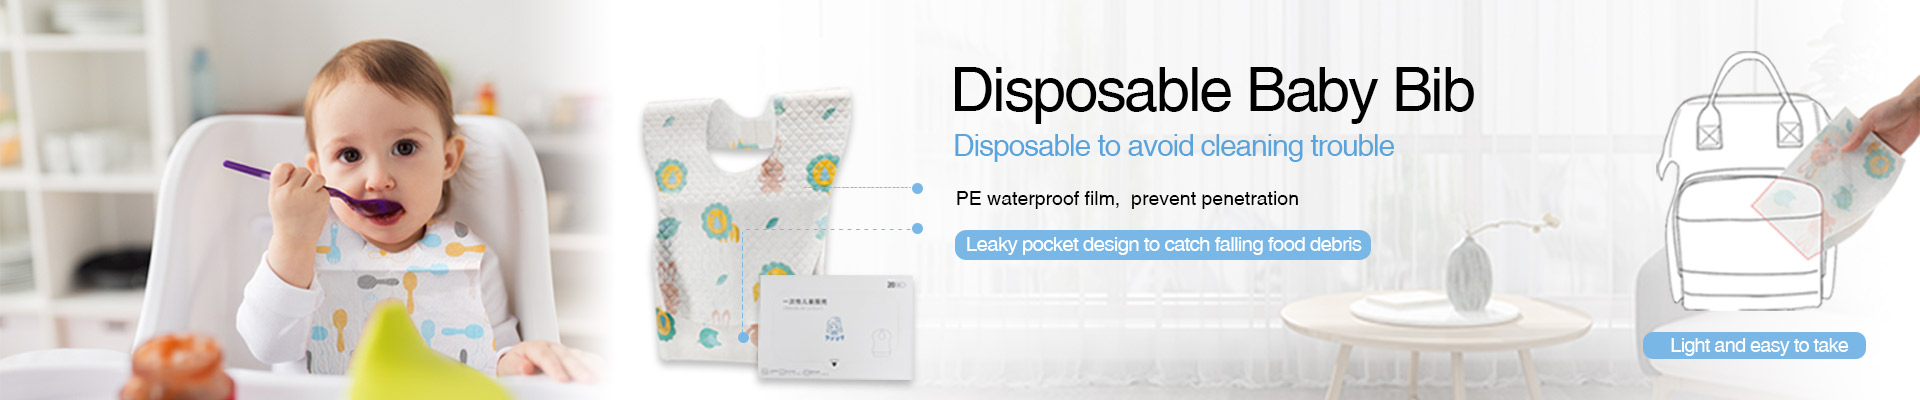 Disposable Baby Care Products